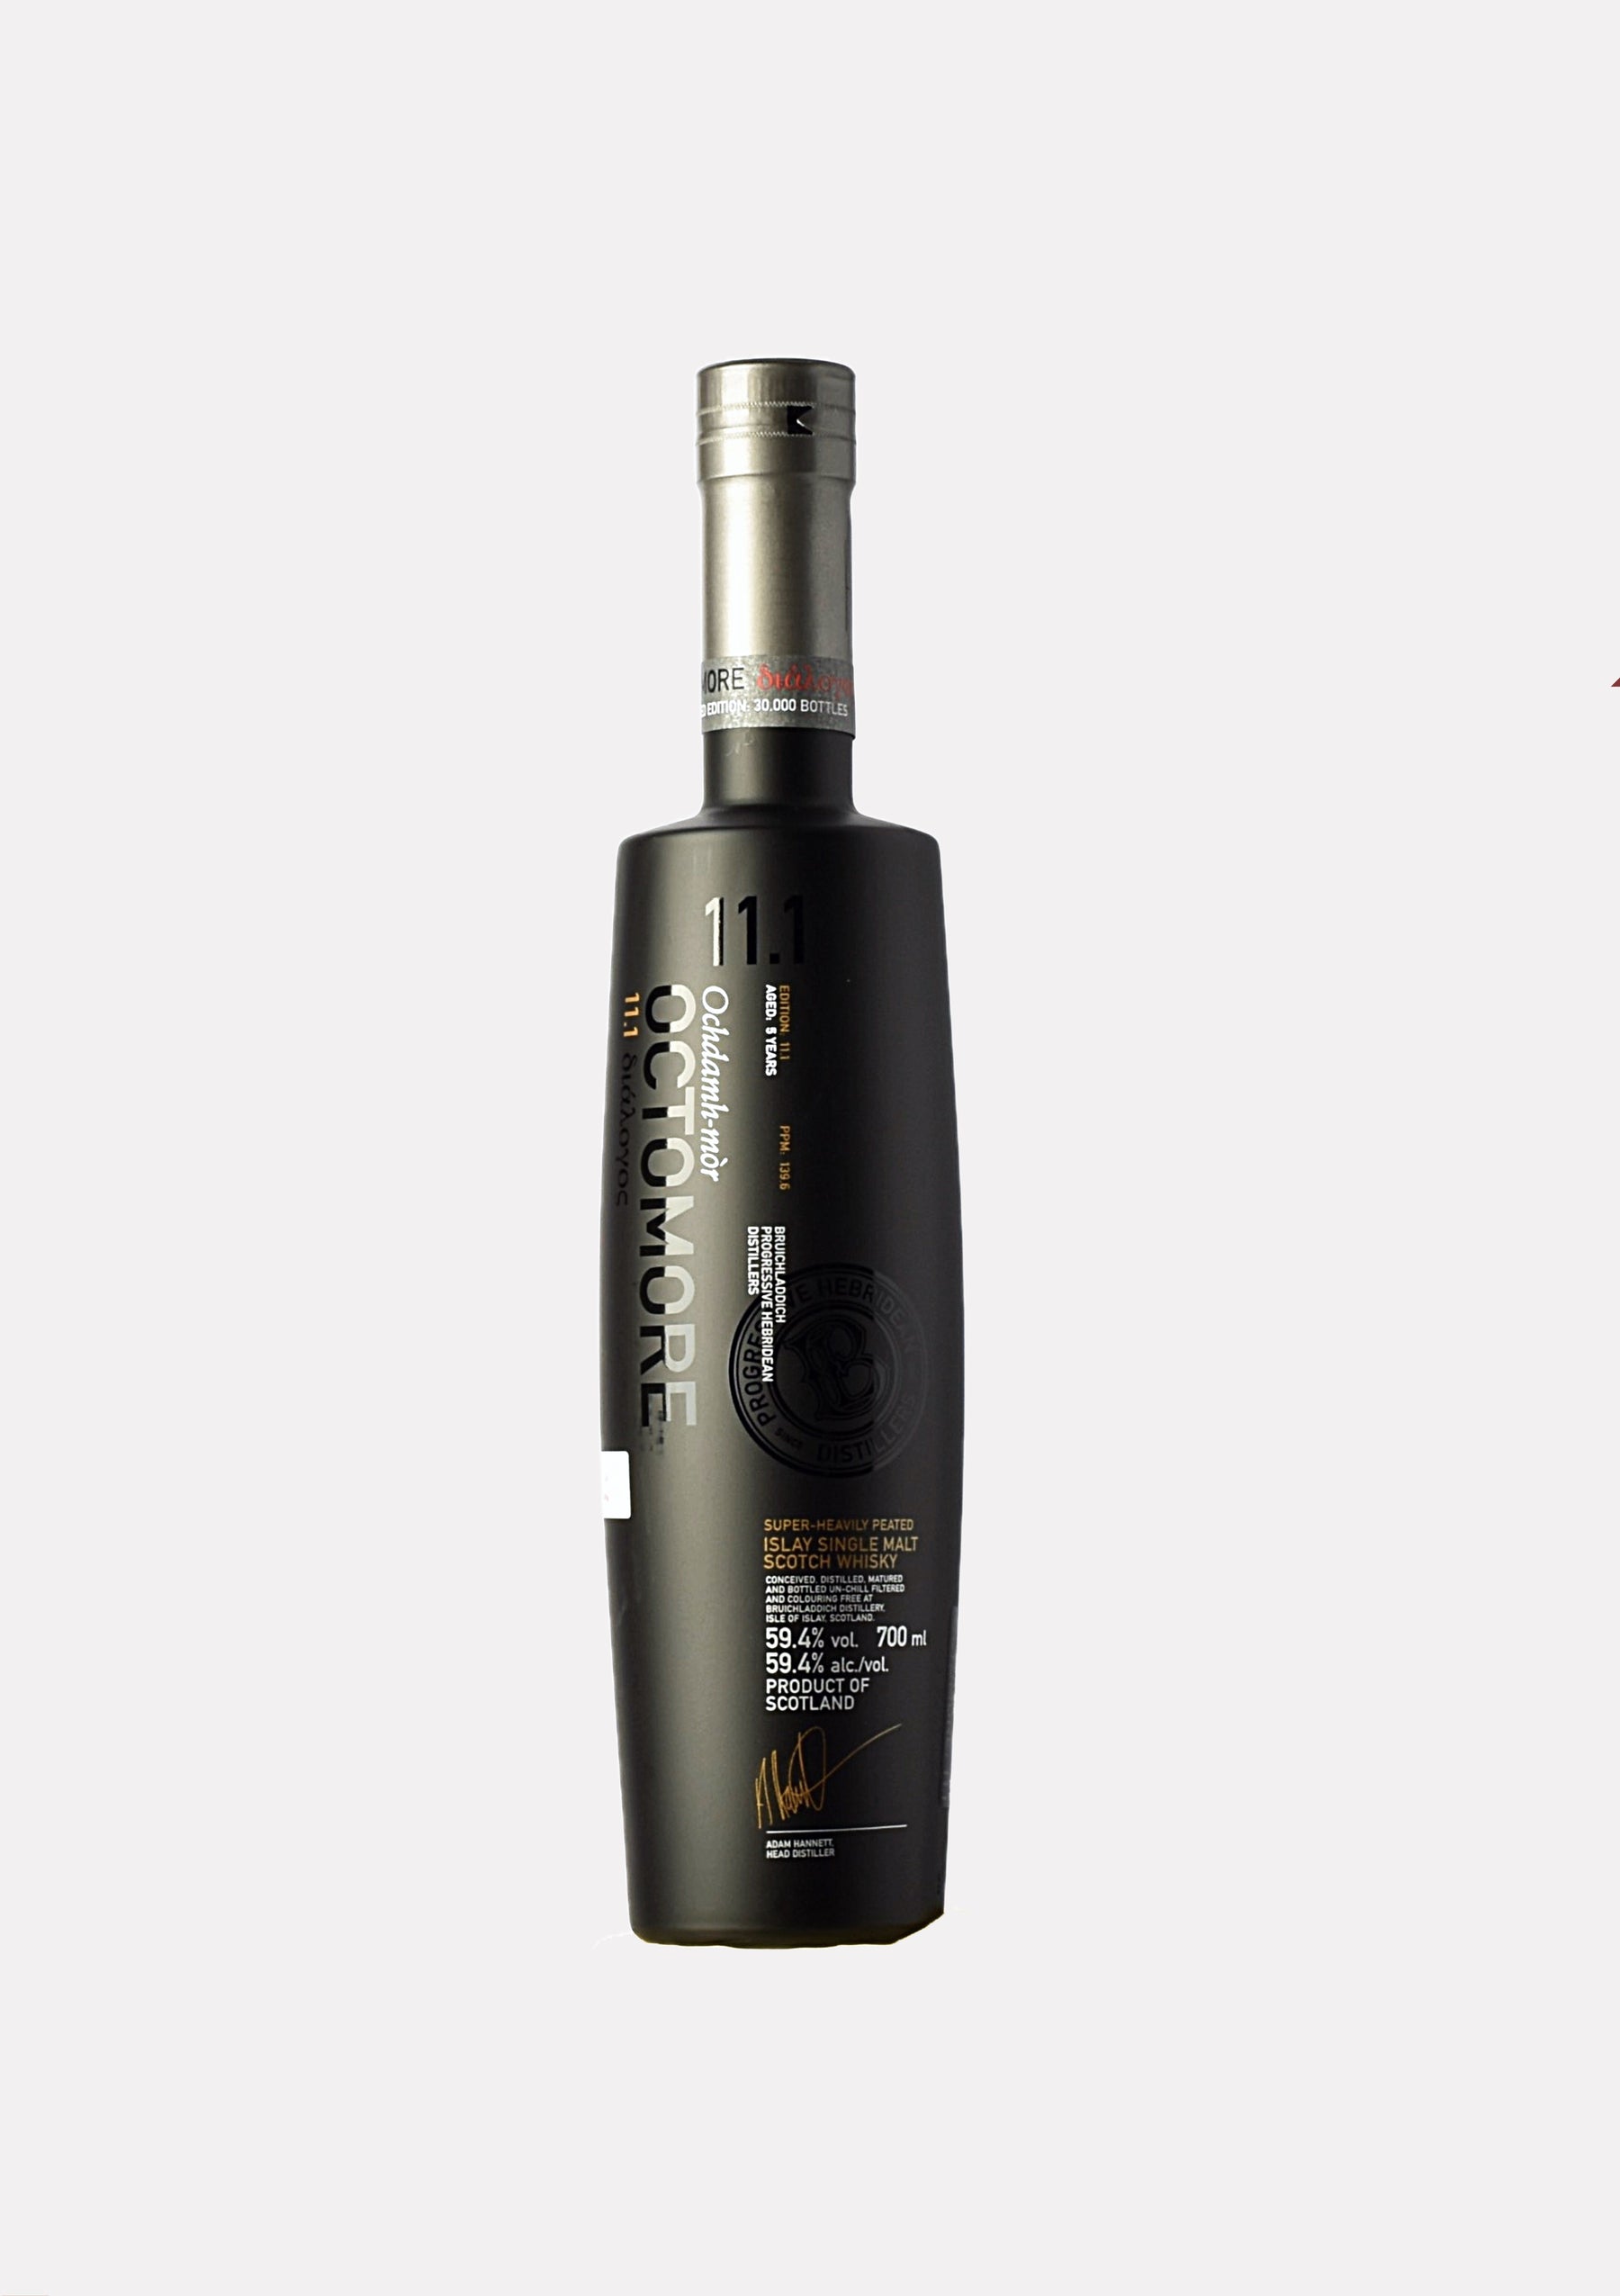 Octomore 2014- 2020 5 Jahre 11.1 139.6 ppm